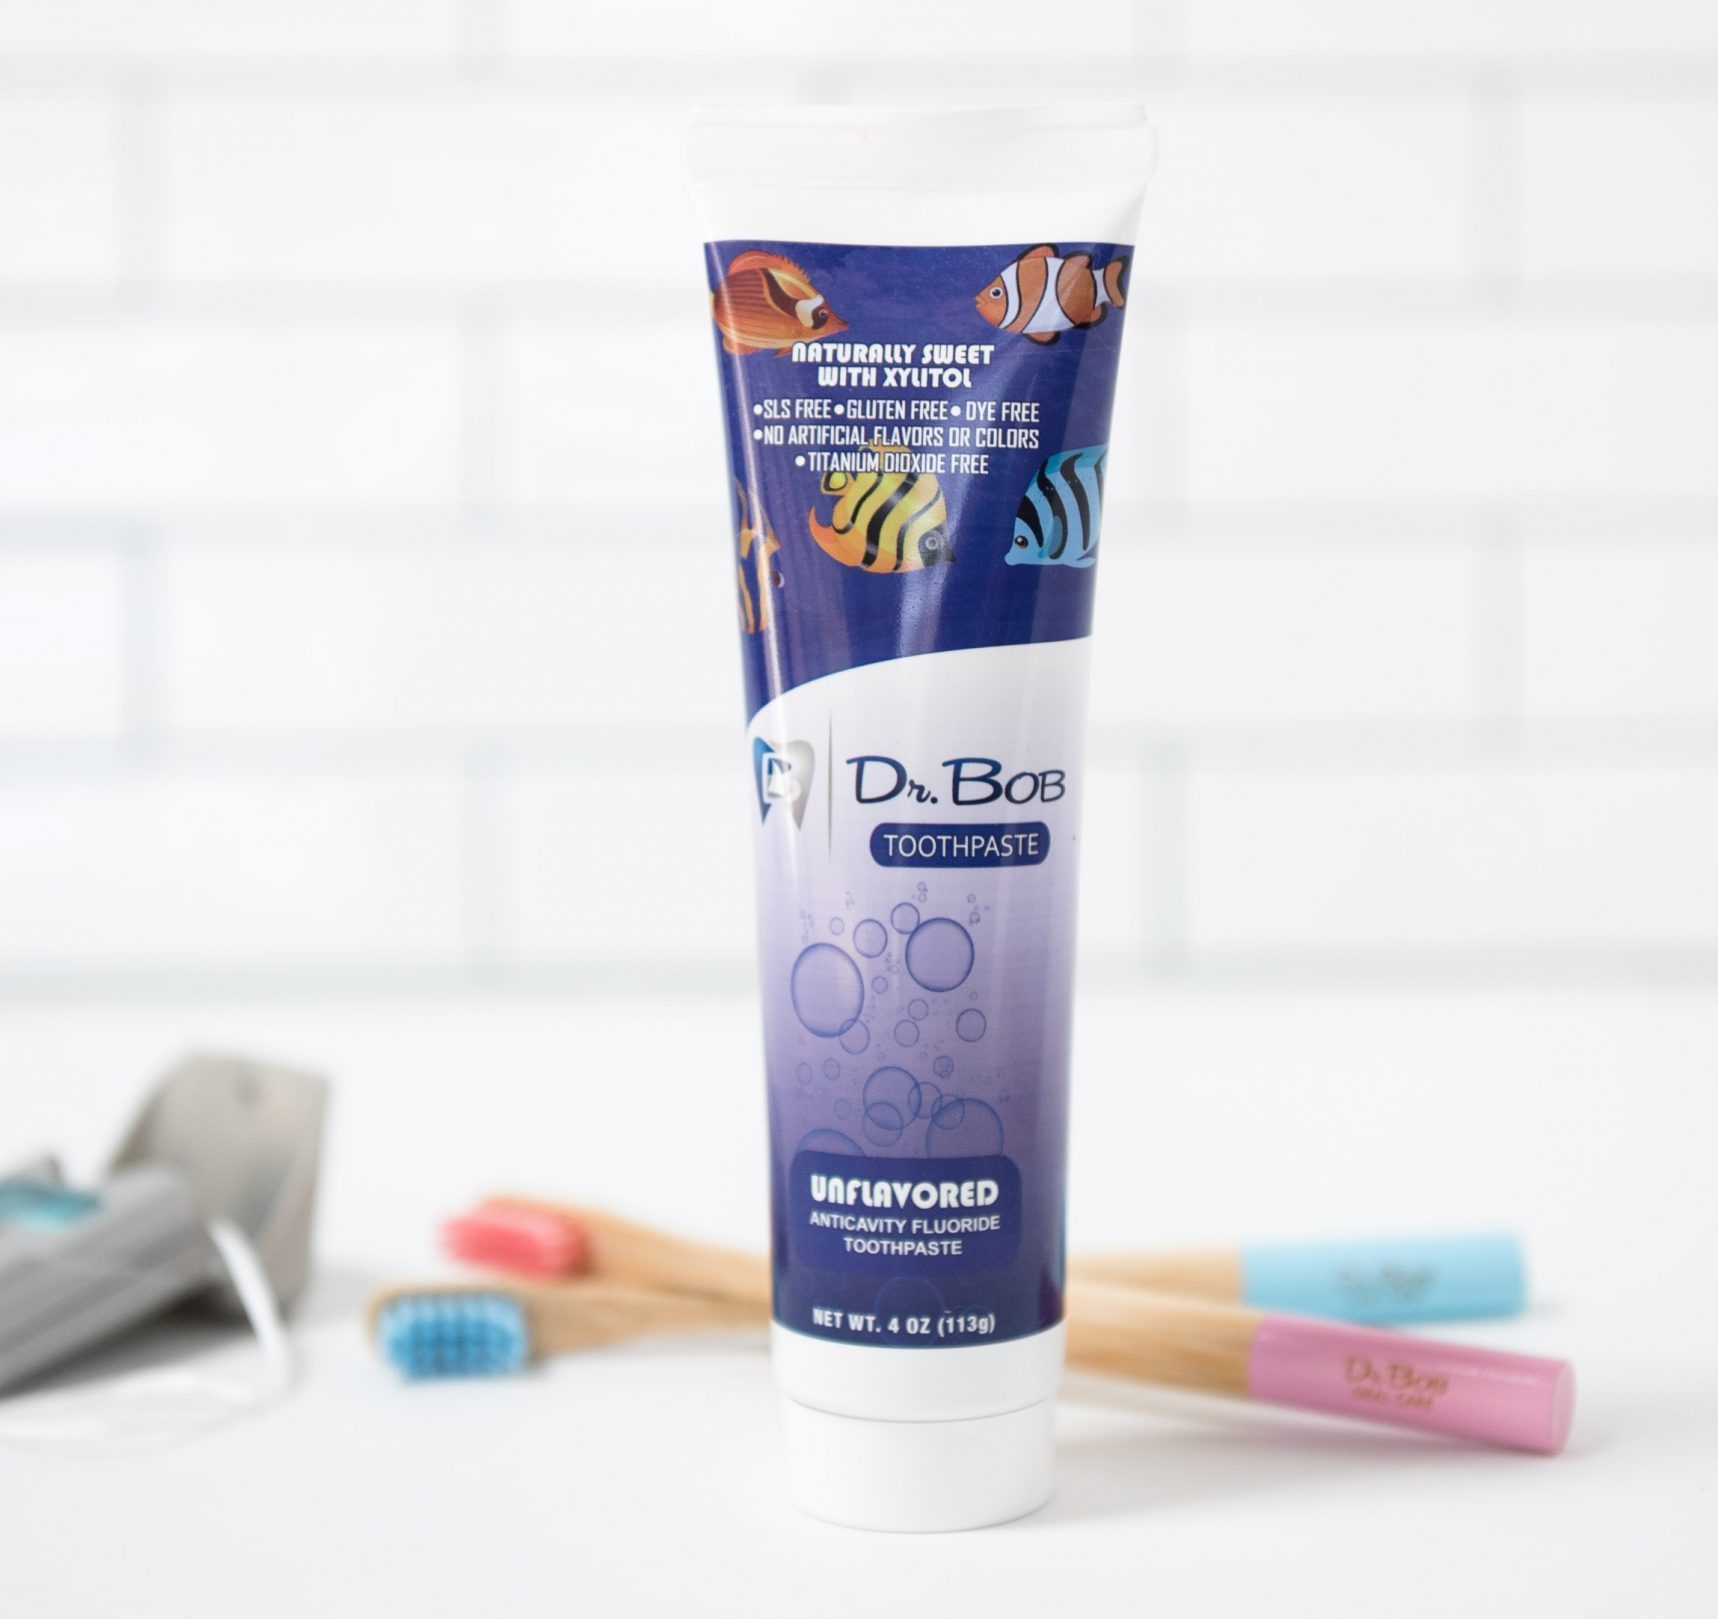 Dr. Bob Unflavored Toothpaste from Dr. Bob Oral Care (Favorite Things: Dr. Bob's Top 6 Dental Products for Kids Lynda Lantz Contributor Miami Mom Collective)